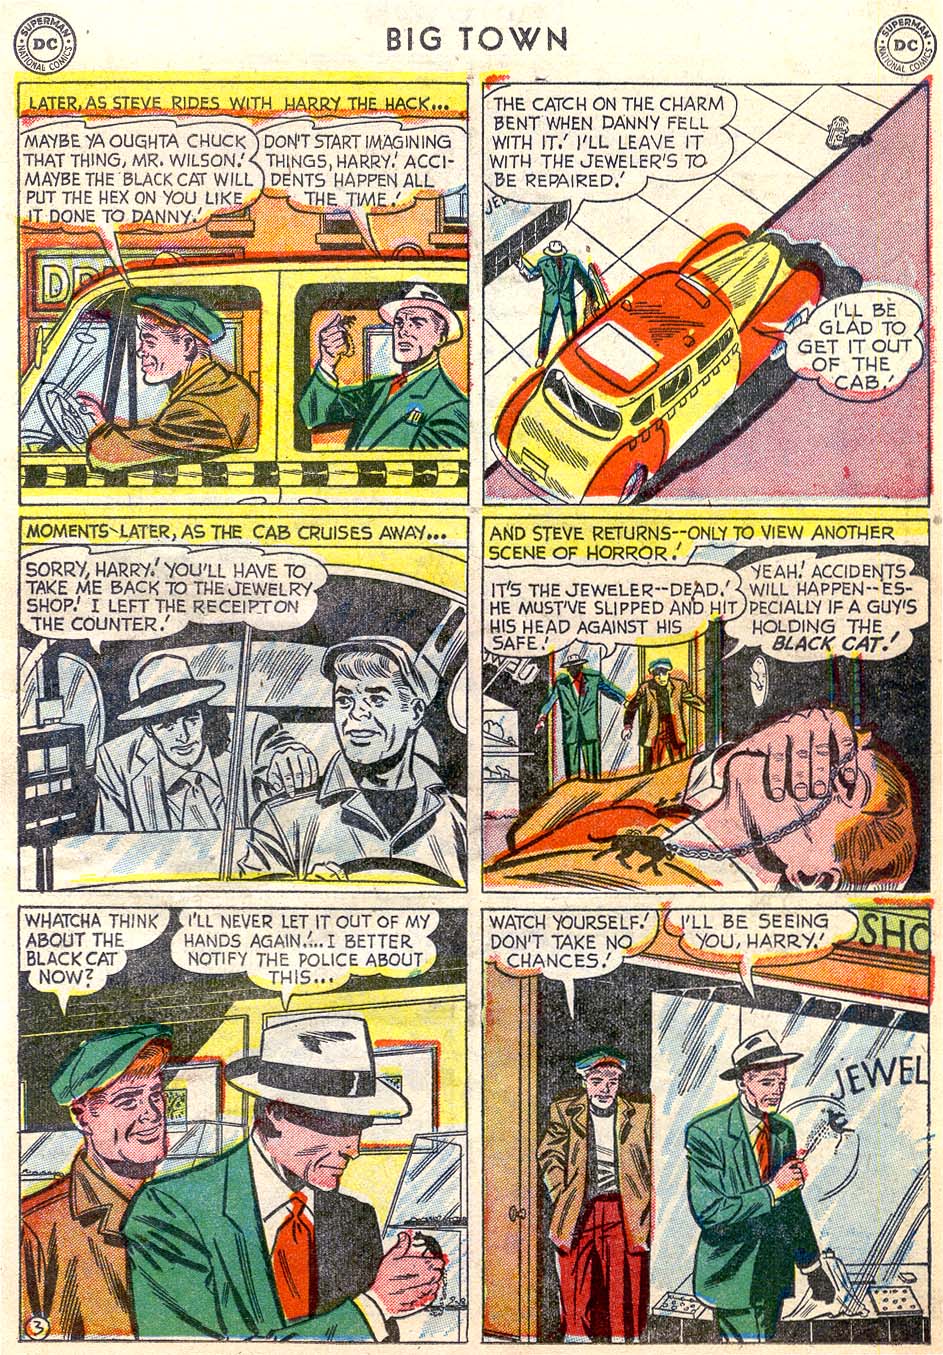 Big Town (1951) 15 Page 14